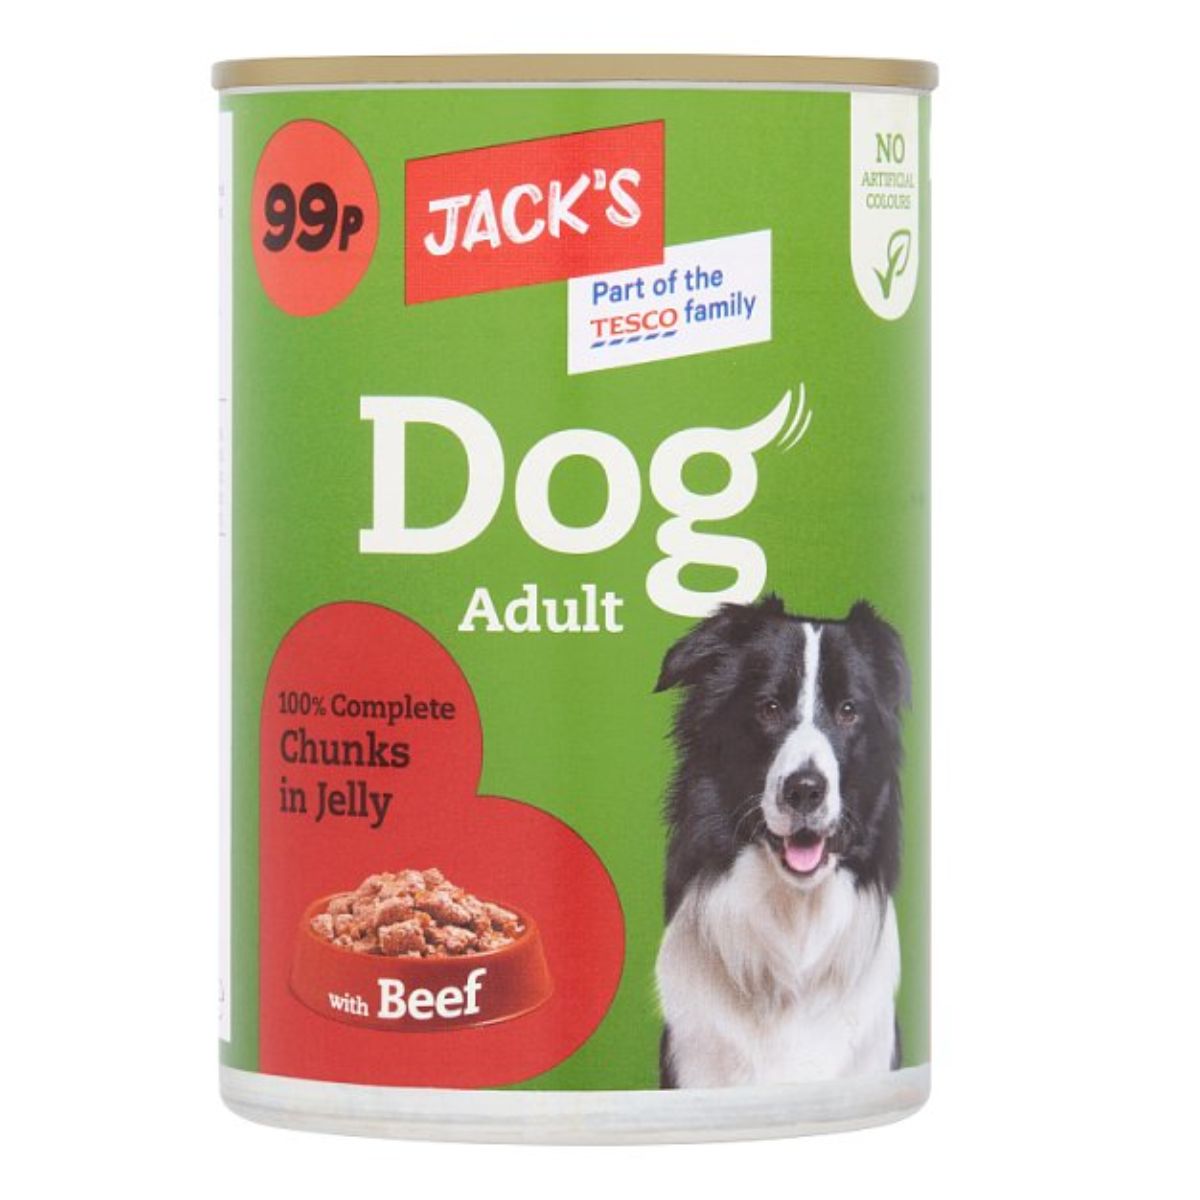 A can of Jacks - Dog Beef & Jelly - 415g, priced at 99p, bearing the Tesco family logo.